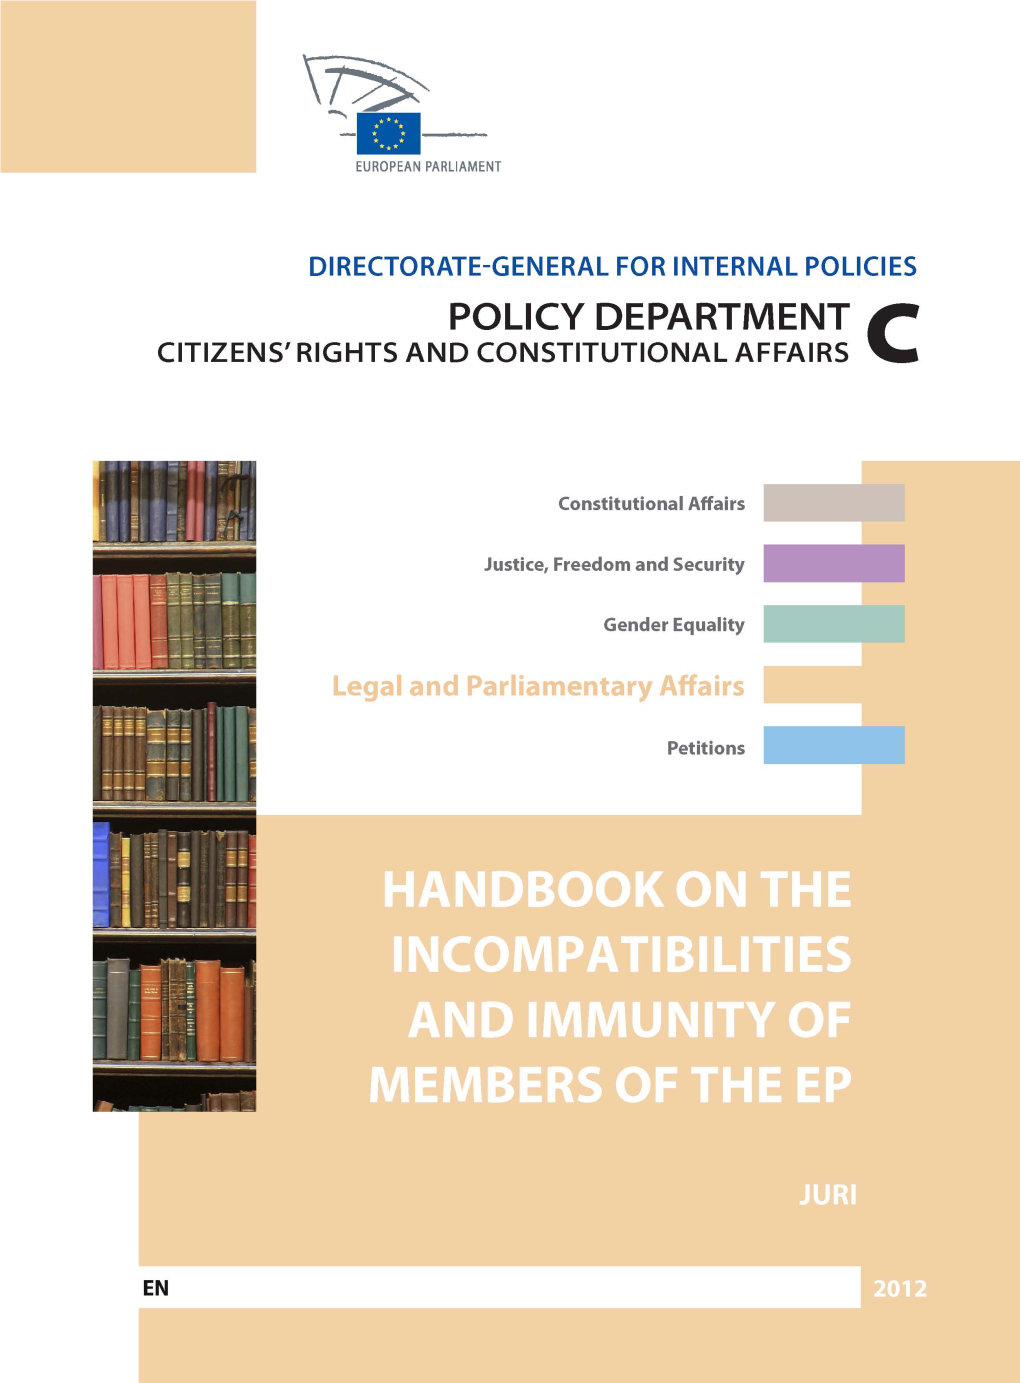 Handbook on the Incompatibilities and Immunity of the Members of the European Parliament